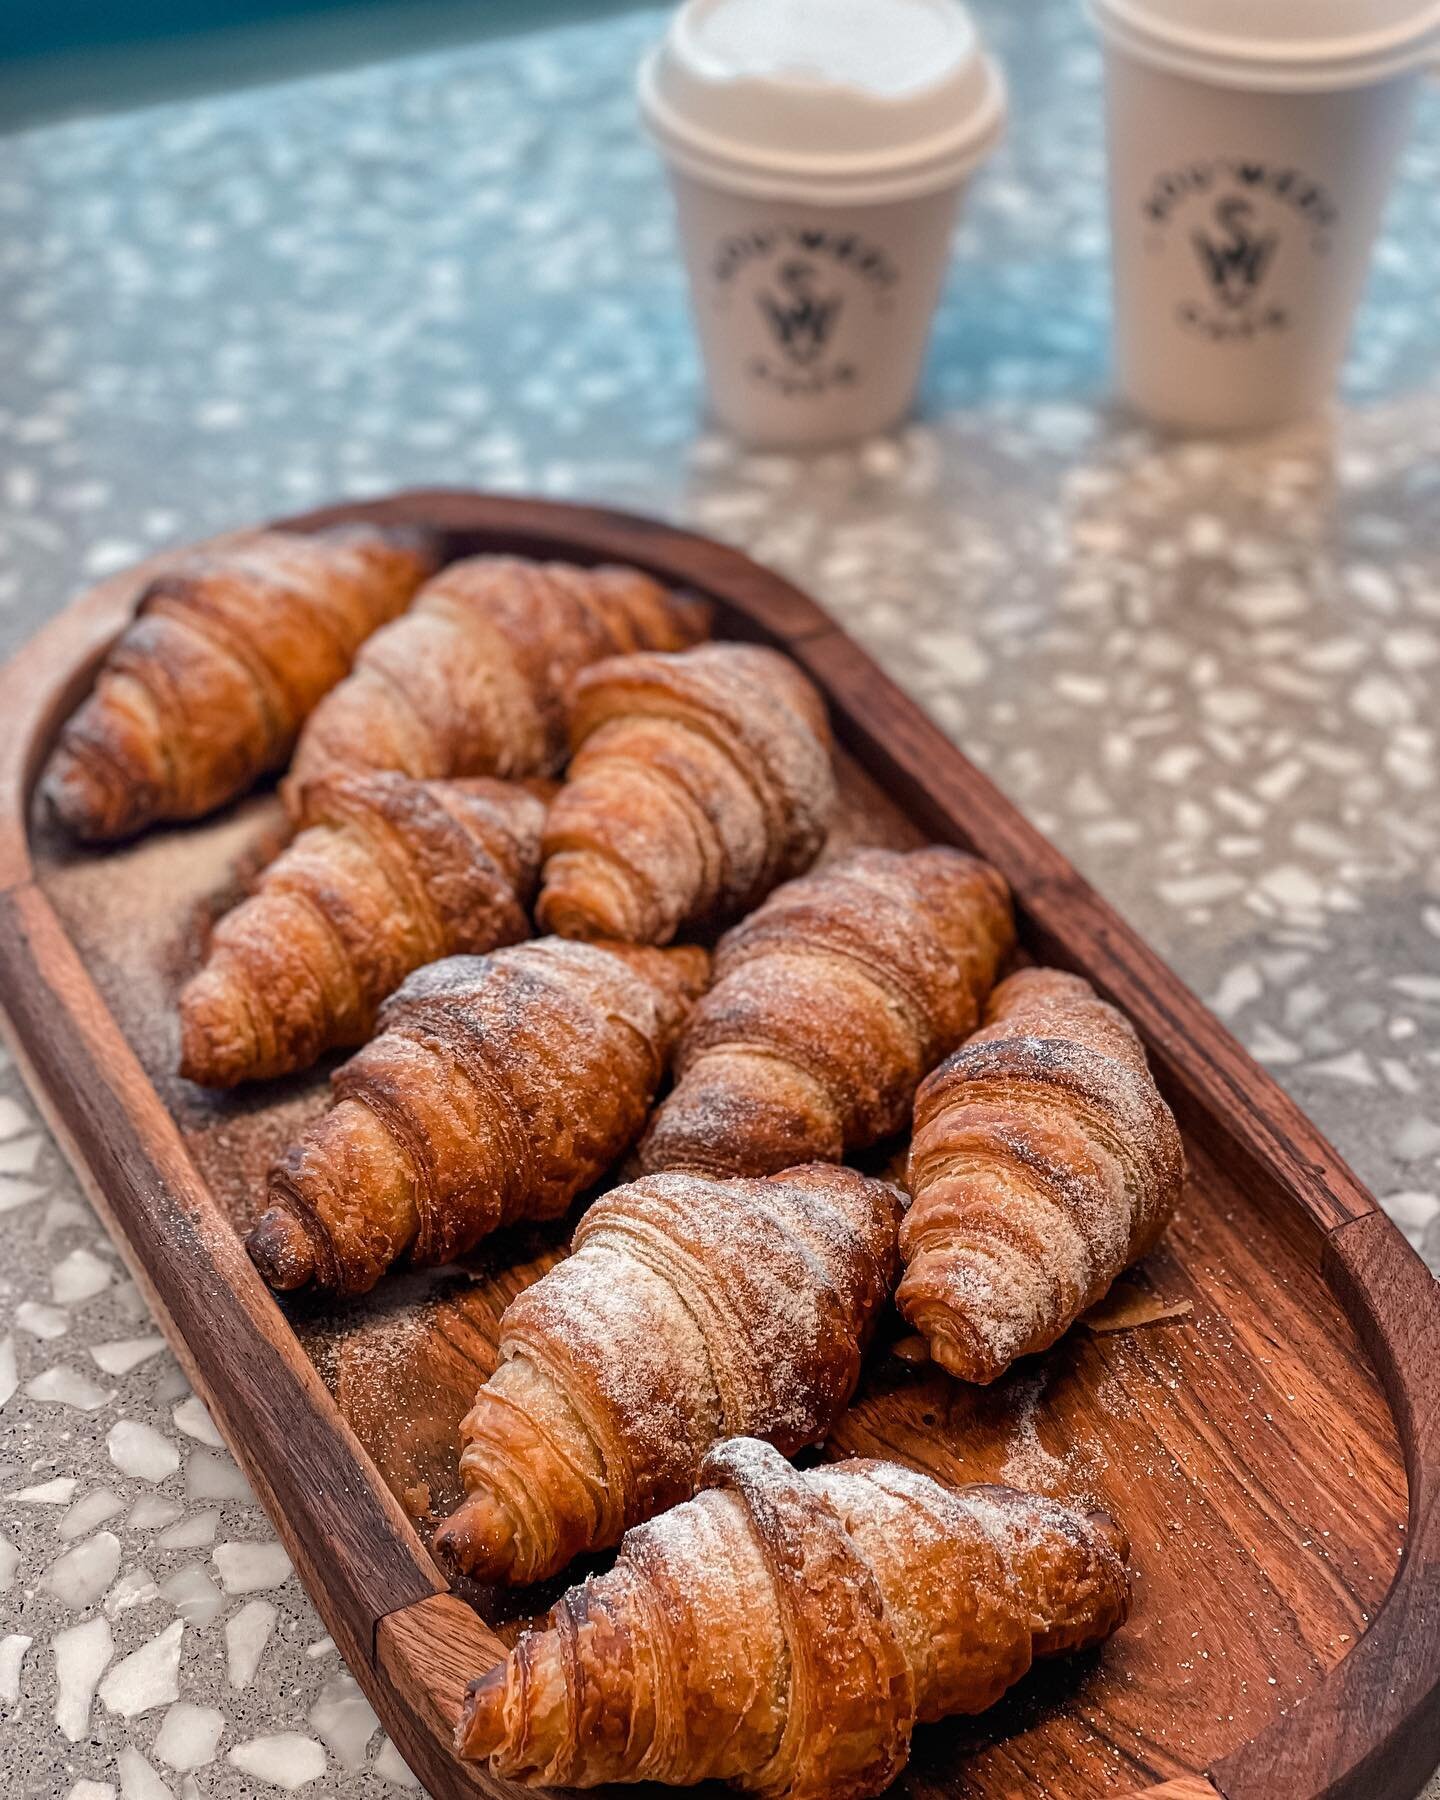 Crispy, flakey, soft &amp; buttery 🥐 Chef Toby&rsquo;s homemade mini sourdough crossaints tick all those boxes! The perfect combo with a ☕️ and yours until 2pm today! 

#sourdough #sourdoughcroissants #crossaints #homemade #homebaking #cafe #cafefoo